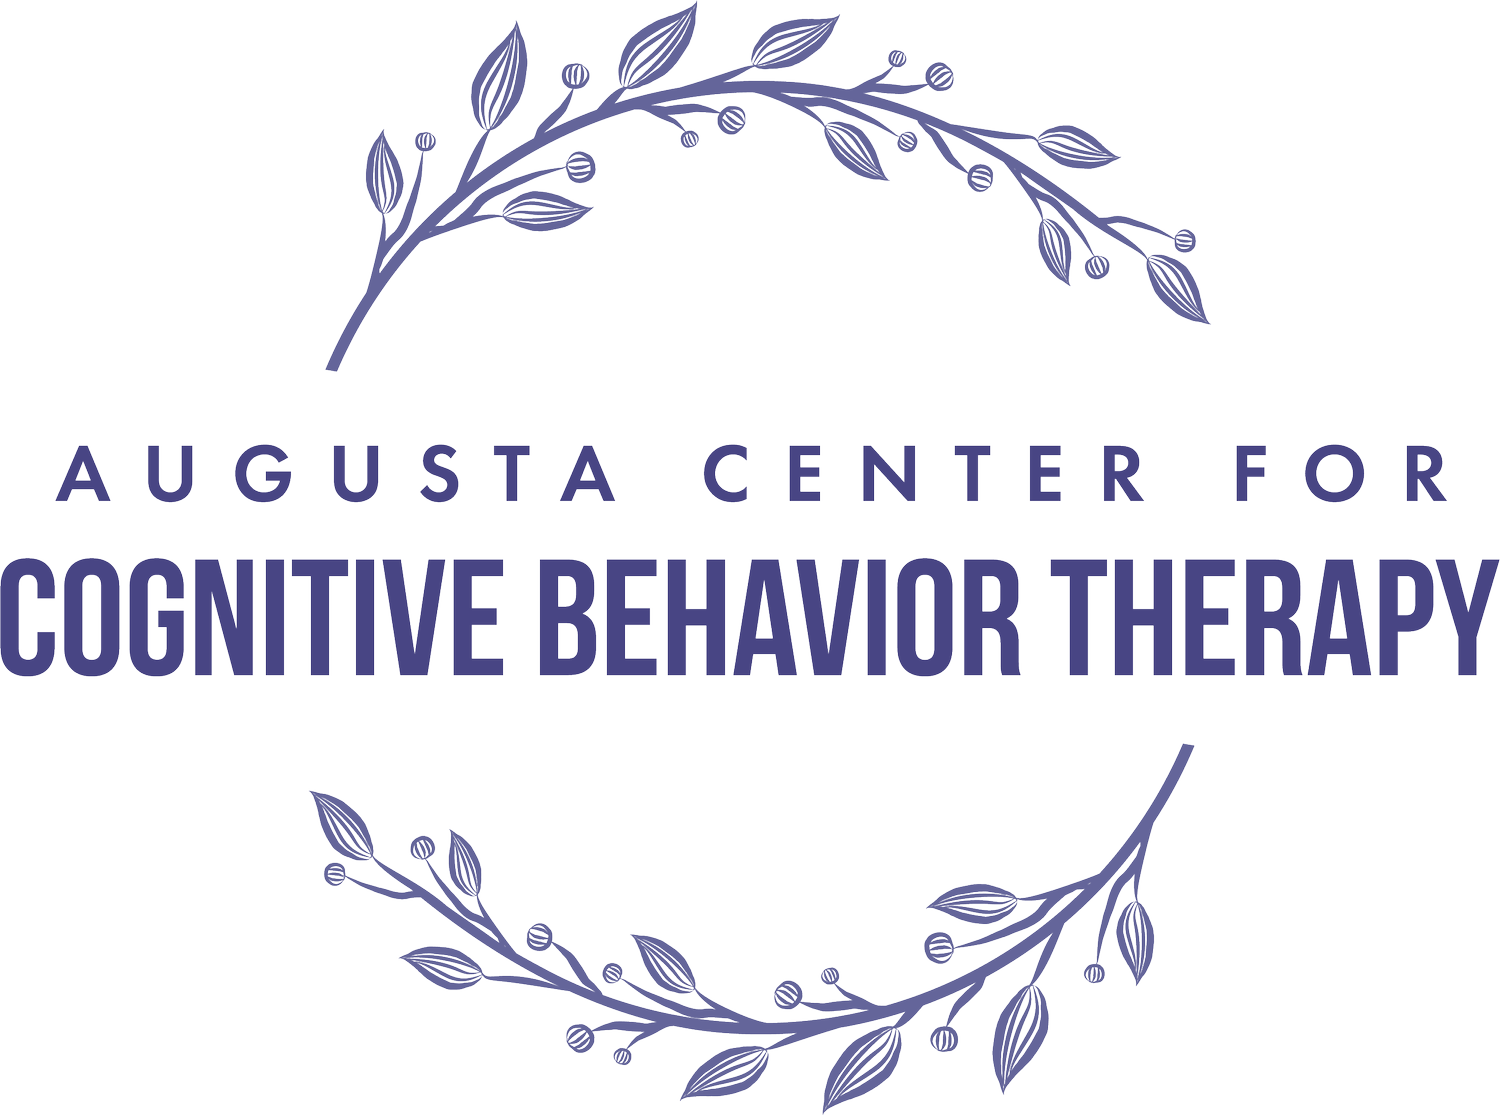 Augusta Center for Cognitive Behavior Therapy